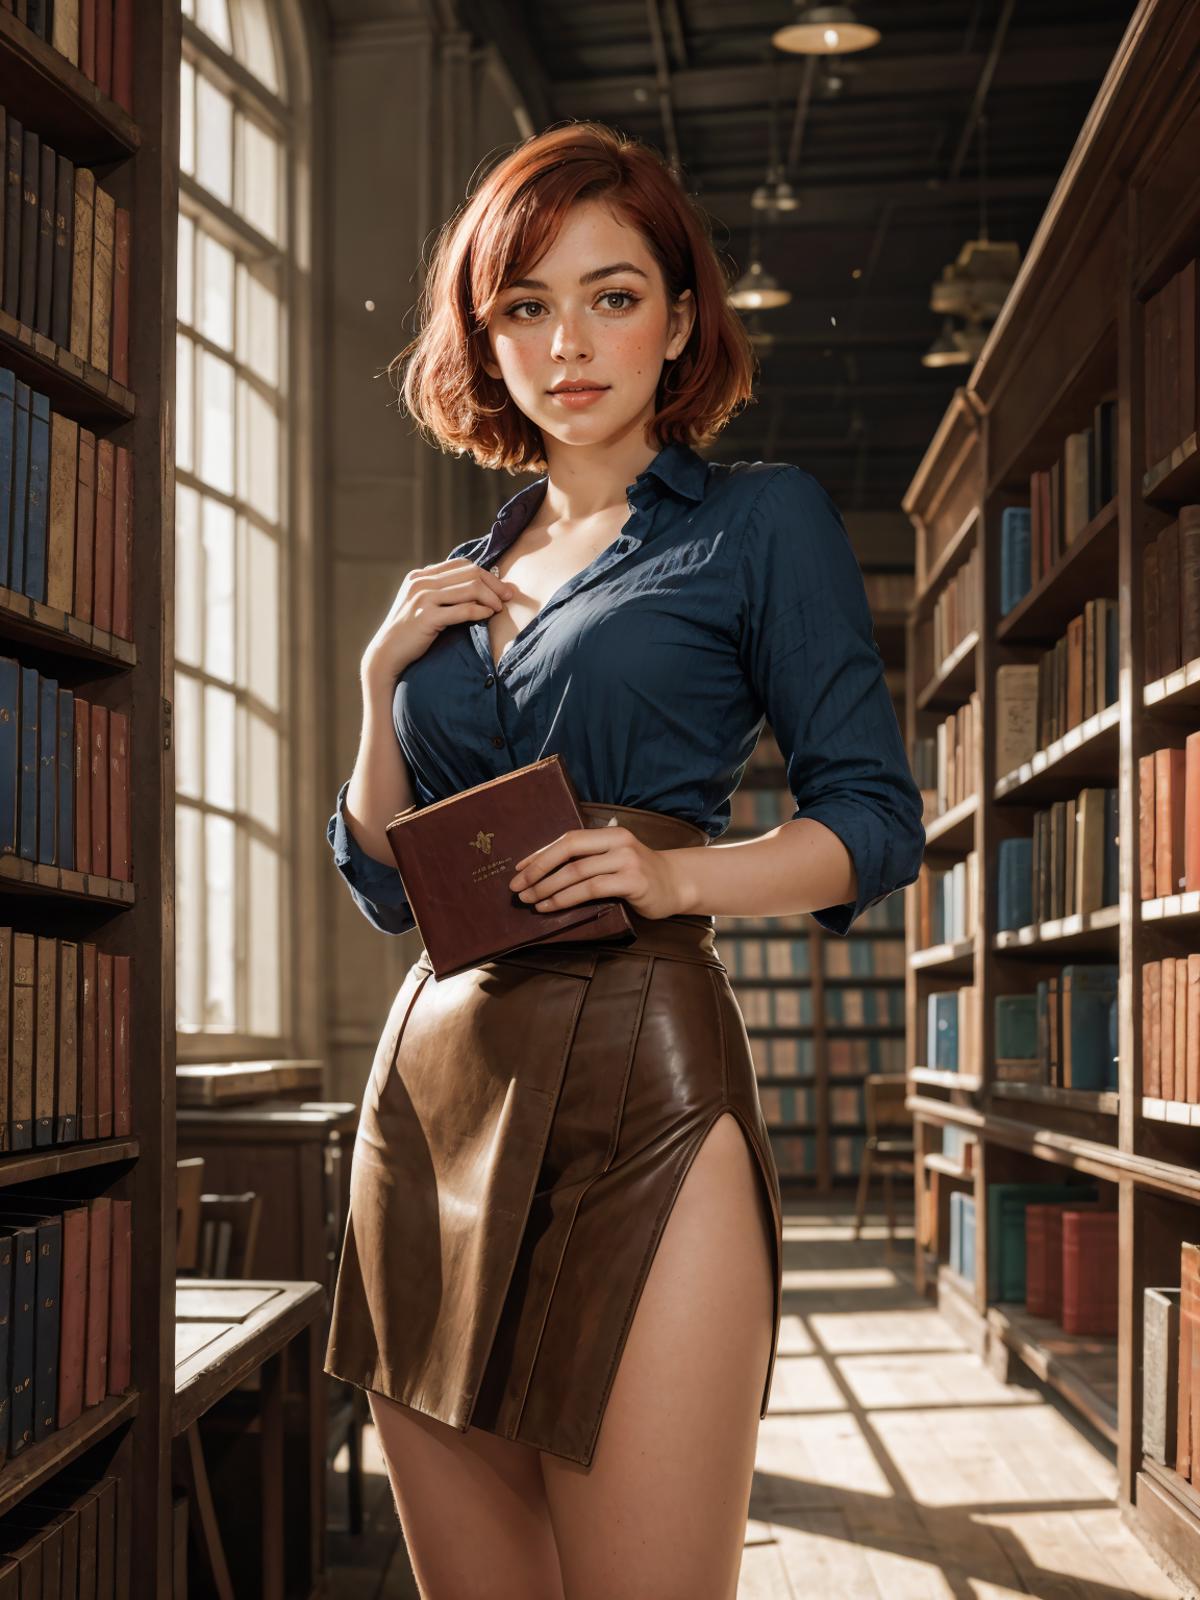 A woman in a library wearing a blue shirt and holding a book.